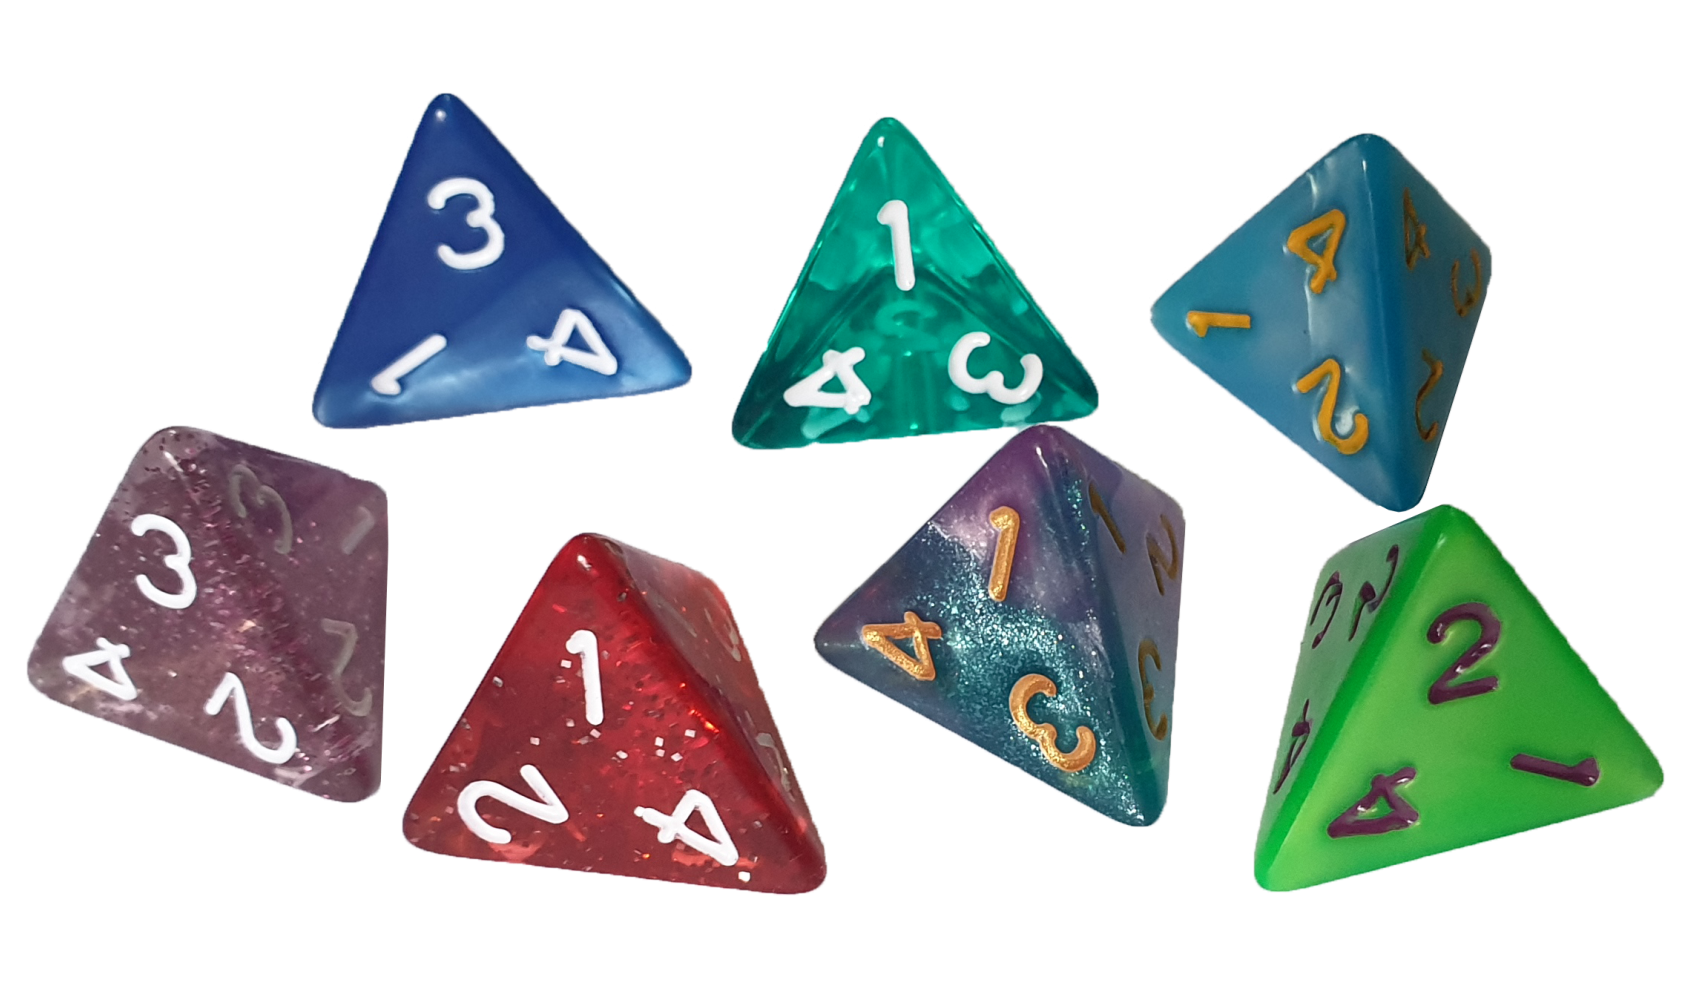 D4 - Acrylic Assorted Digit 4 Sided Dice x2 - Bigger Worlds Games